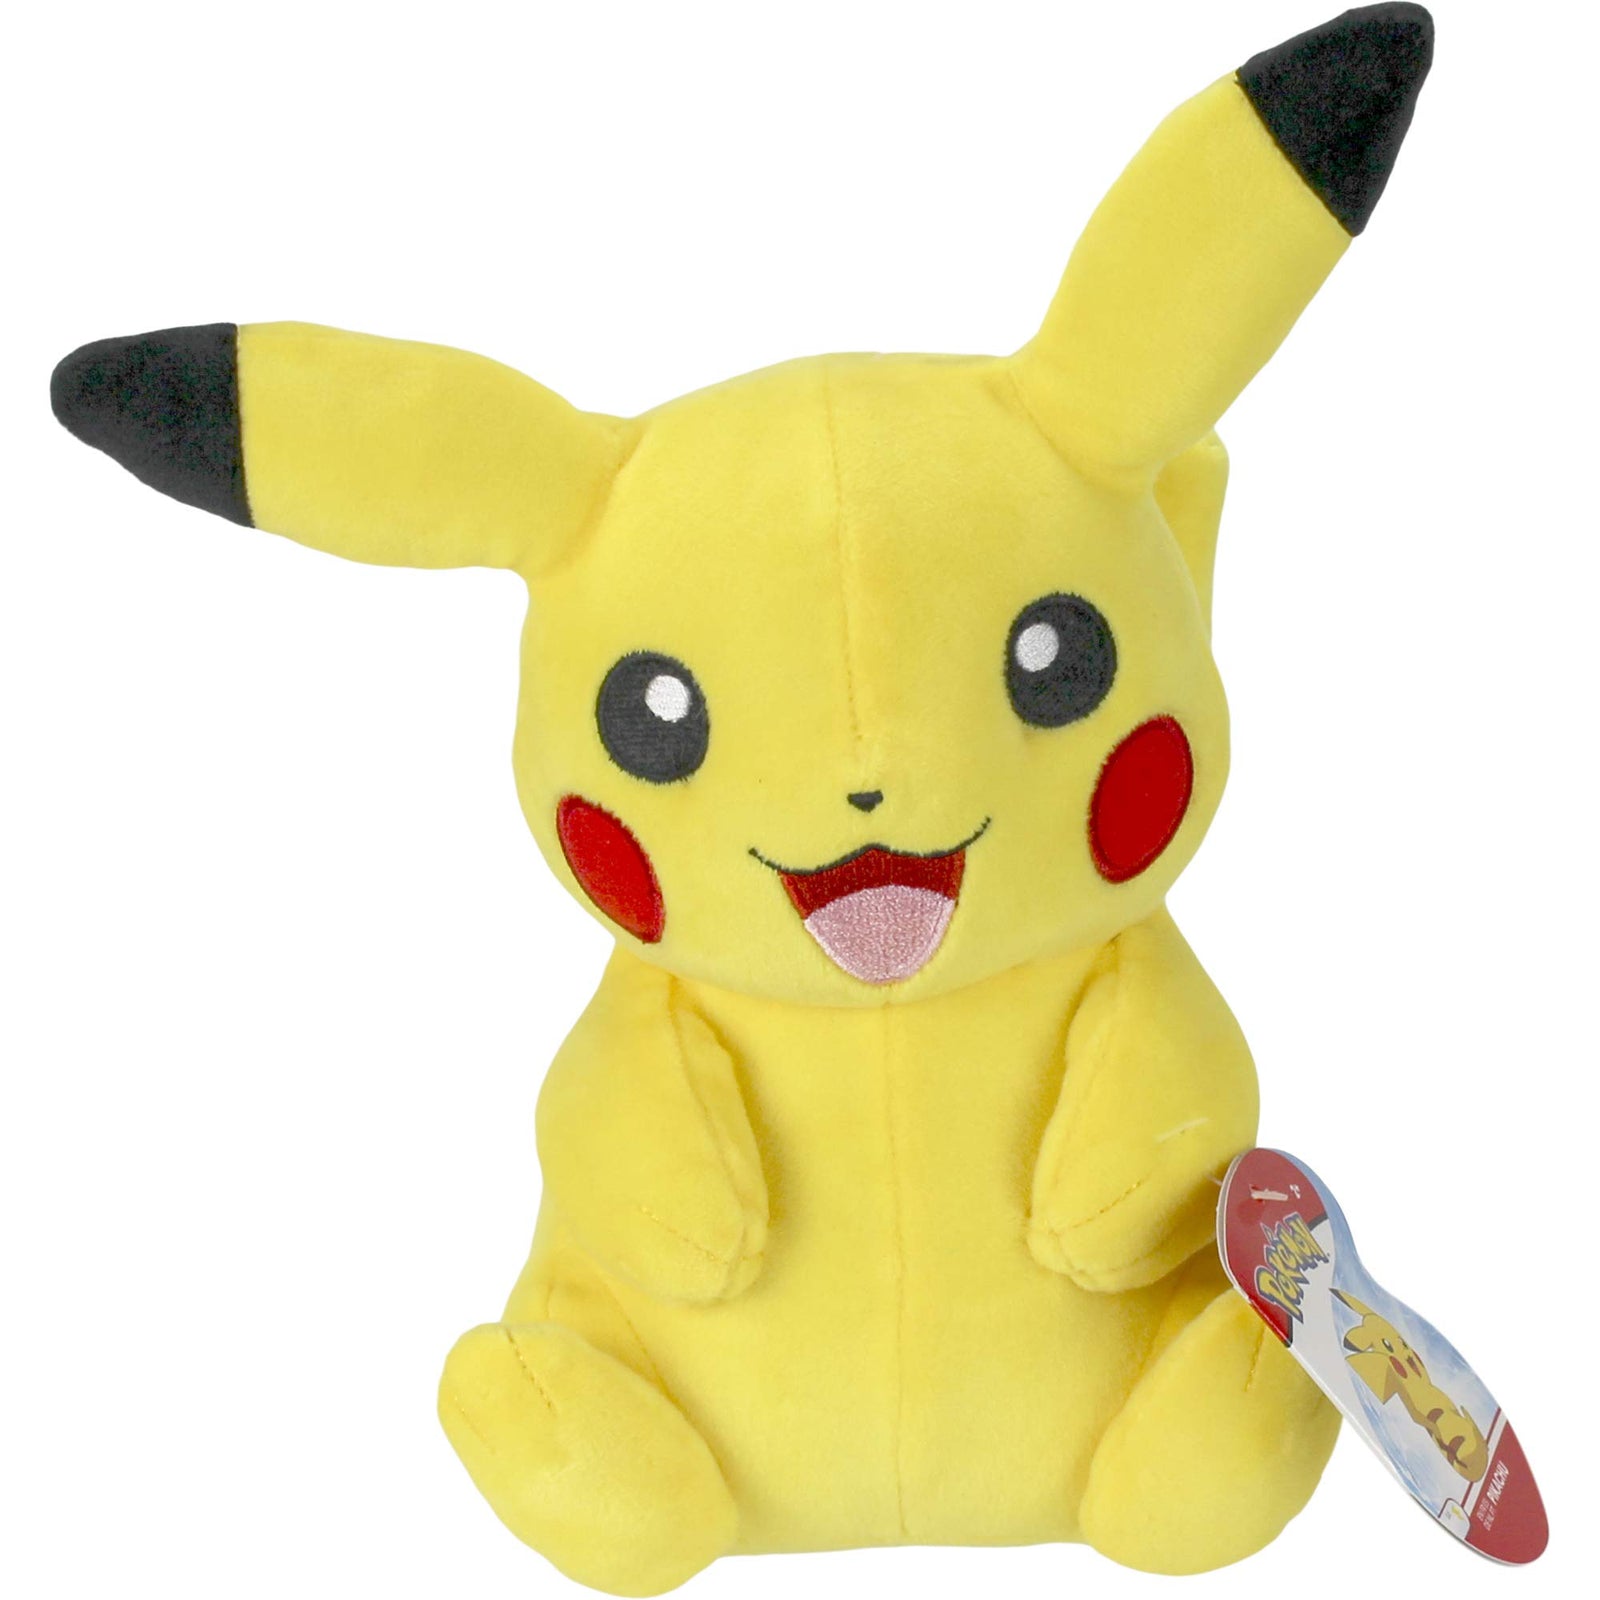 Pokemon Official & Premium Quality 8-Inch Pikachu Plush - Adorable, Ultra-Soft, Plush Toy, Perfect for Playing & Displaying - Gotta Catch ‘Em All , Yellow